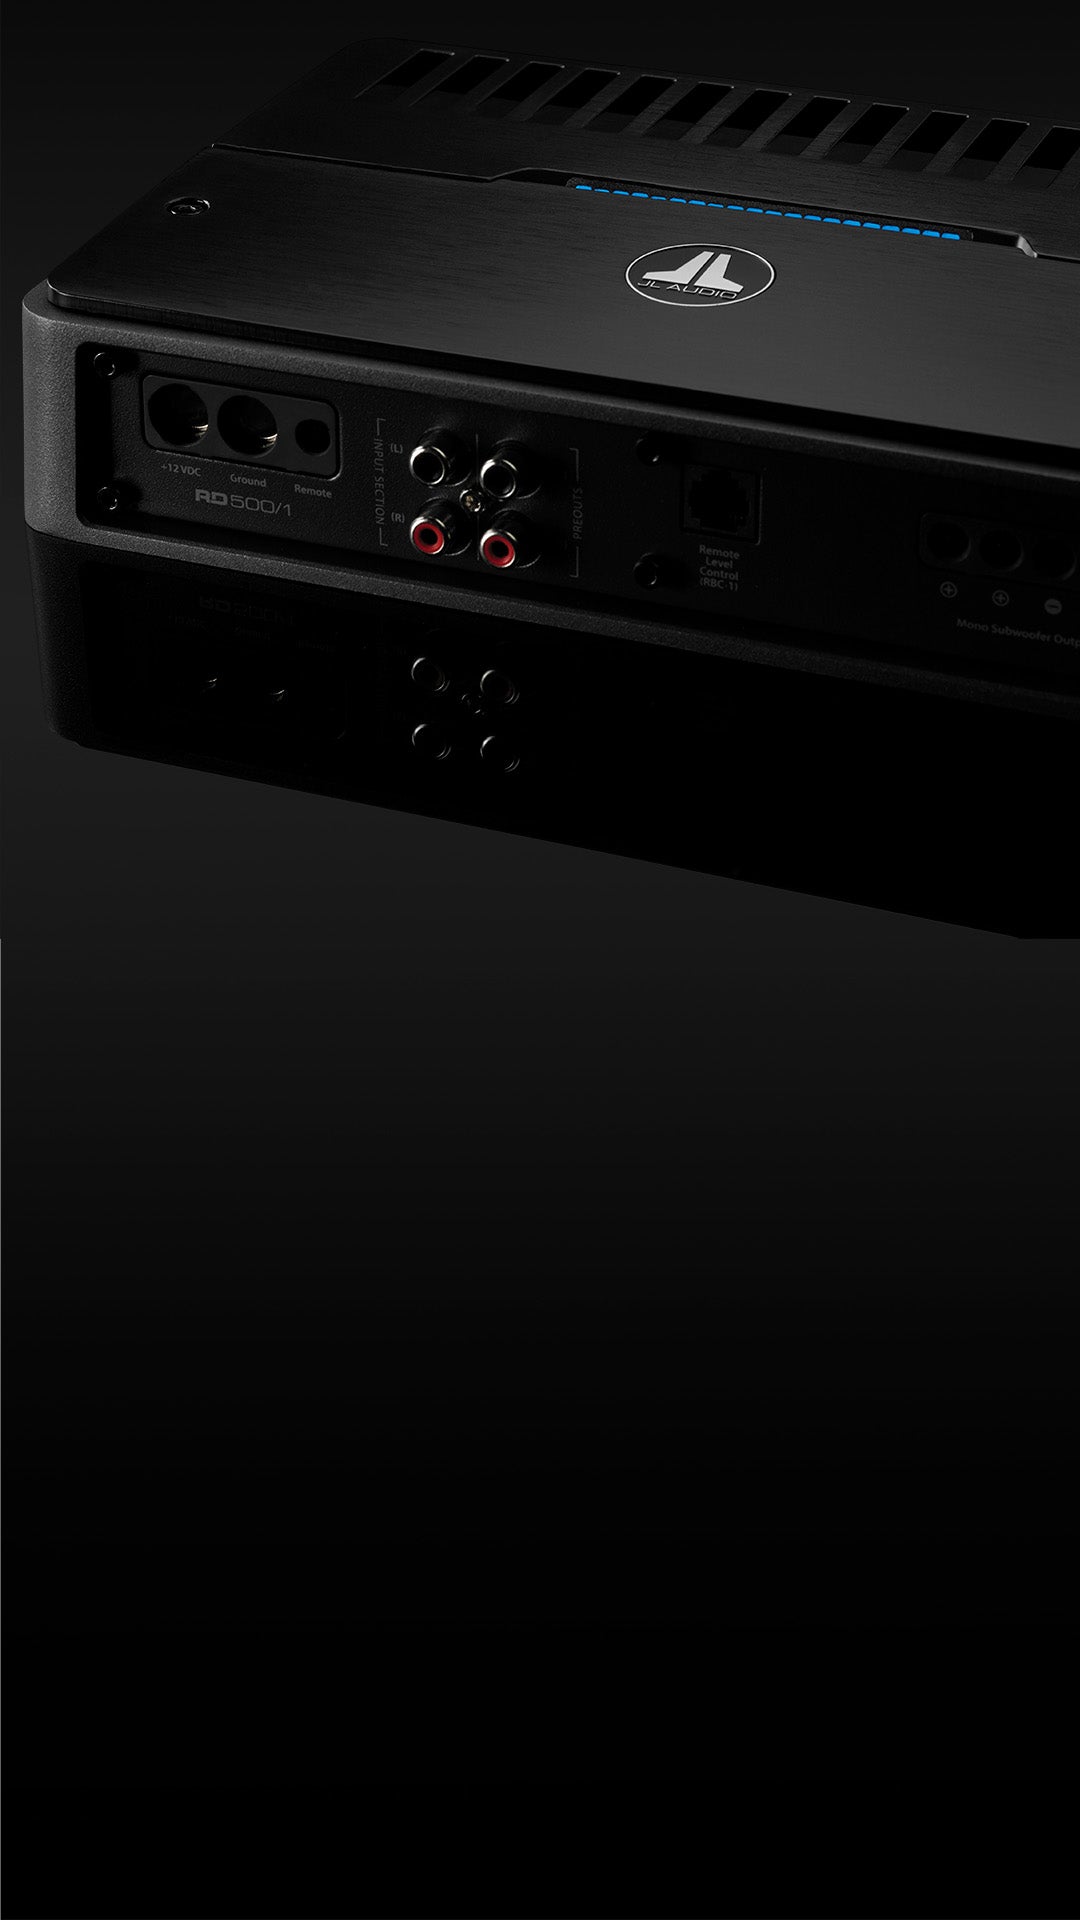 A closeup view of the input panel of an RD amplifier with the top cover on, in a dark sleek surface. 